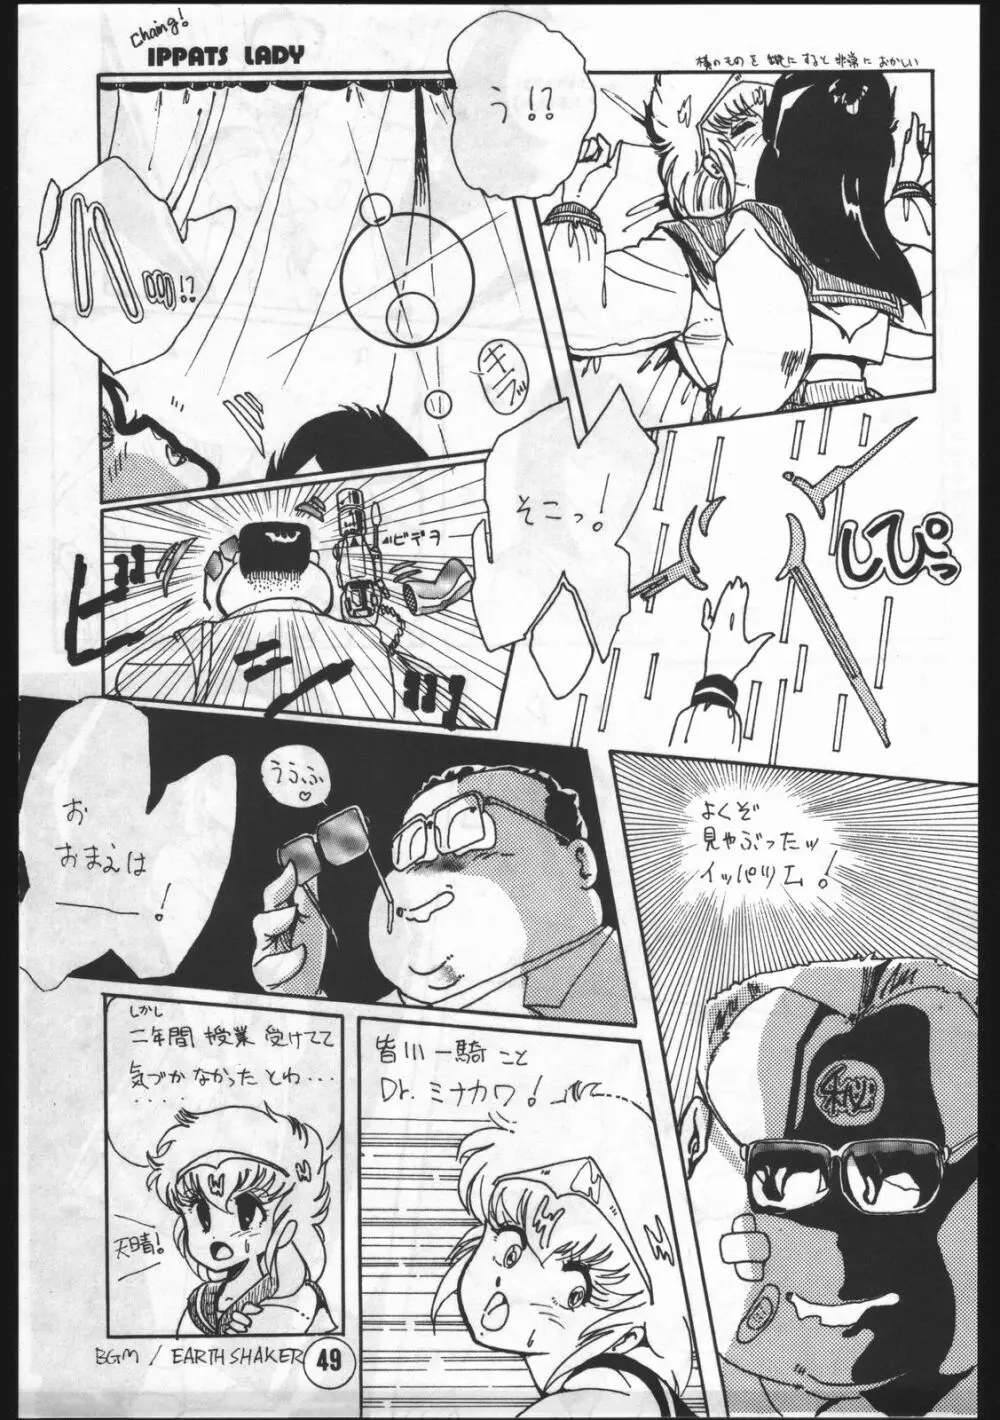 POWER LOVER: ESCAPE SPECIAL 3 Page.49